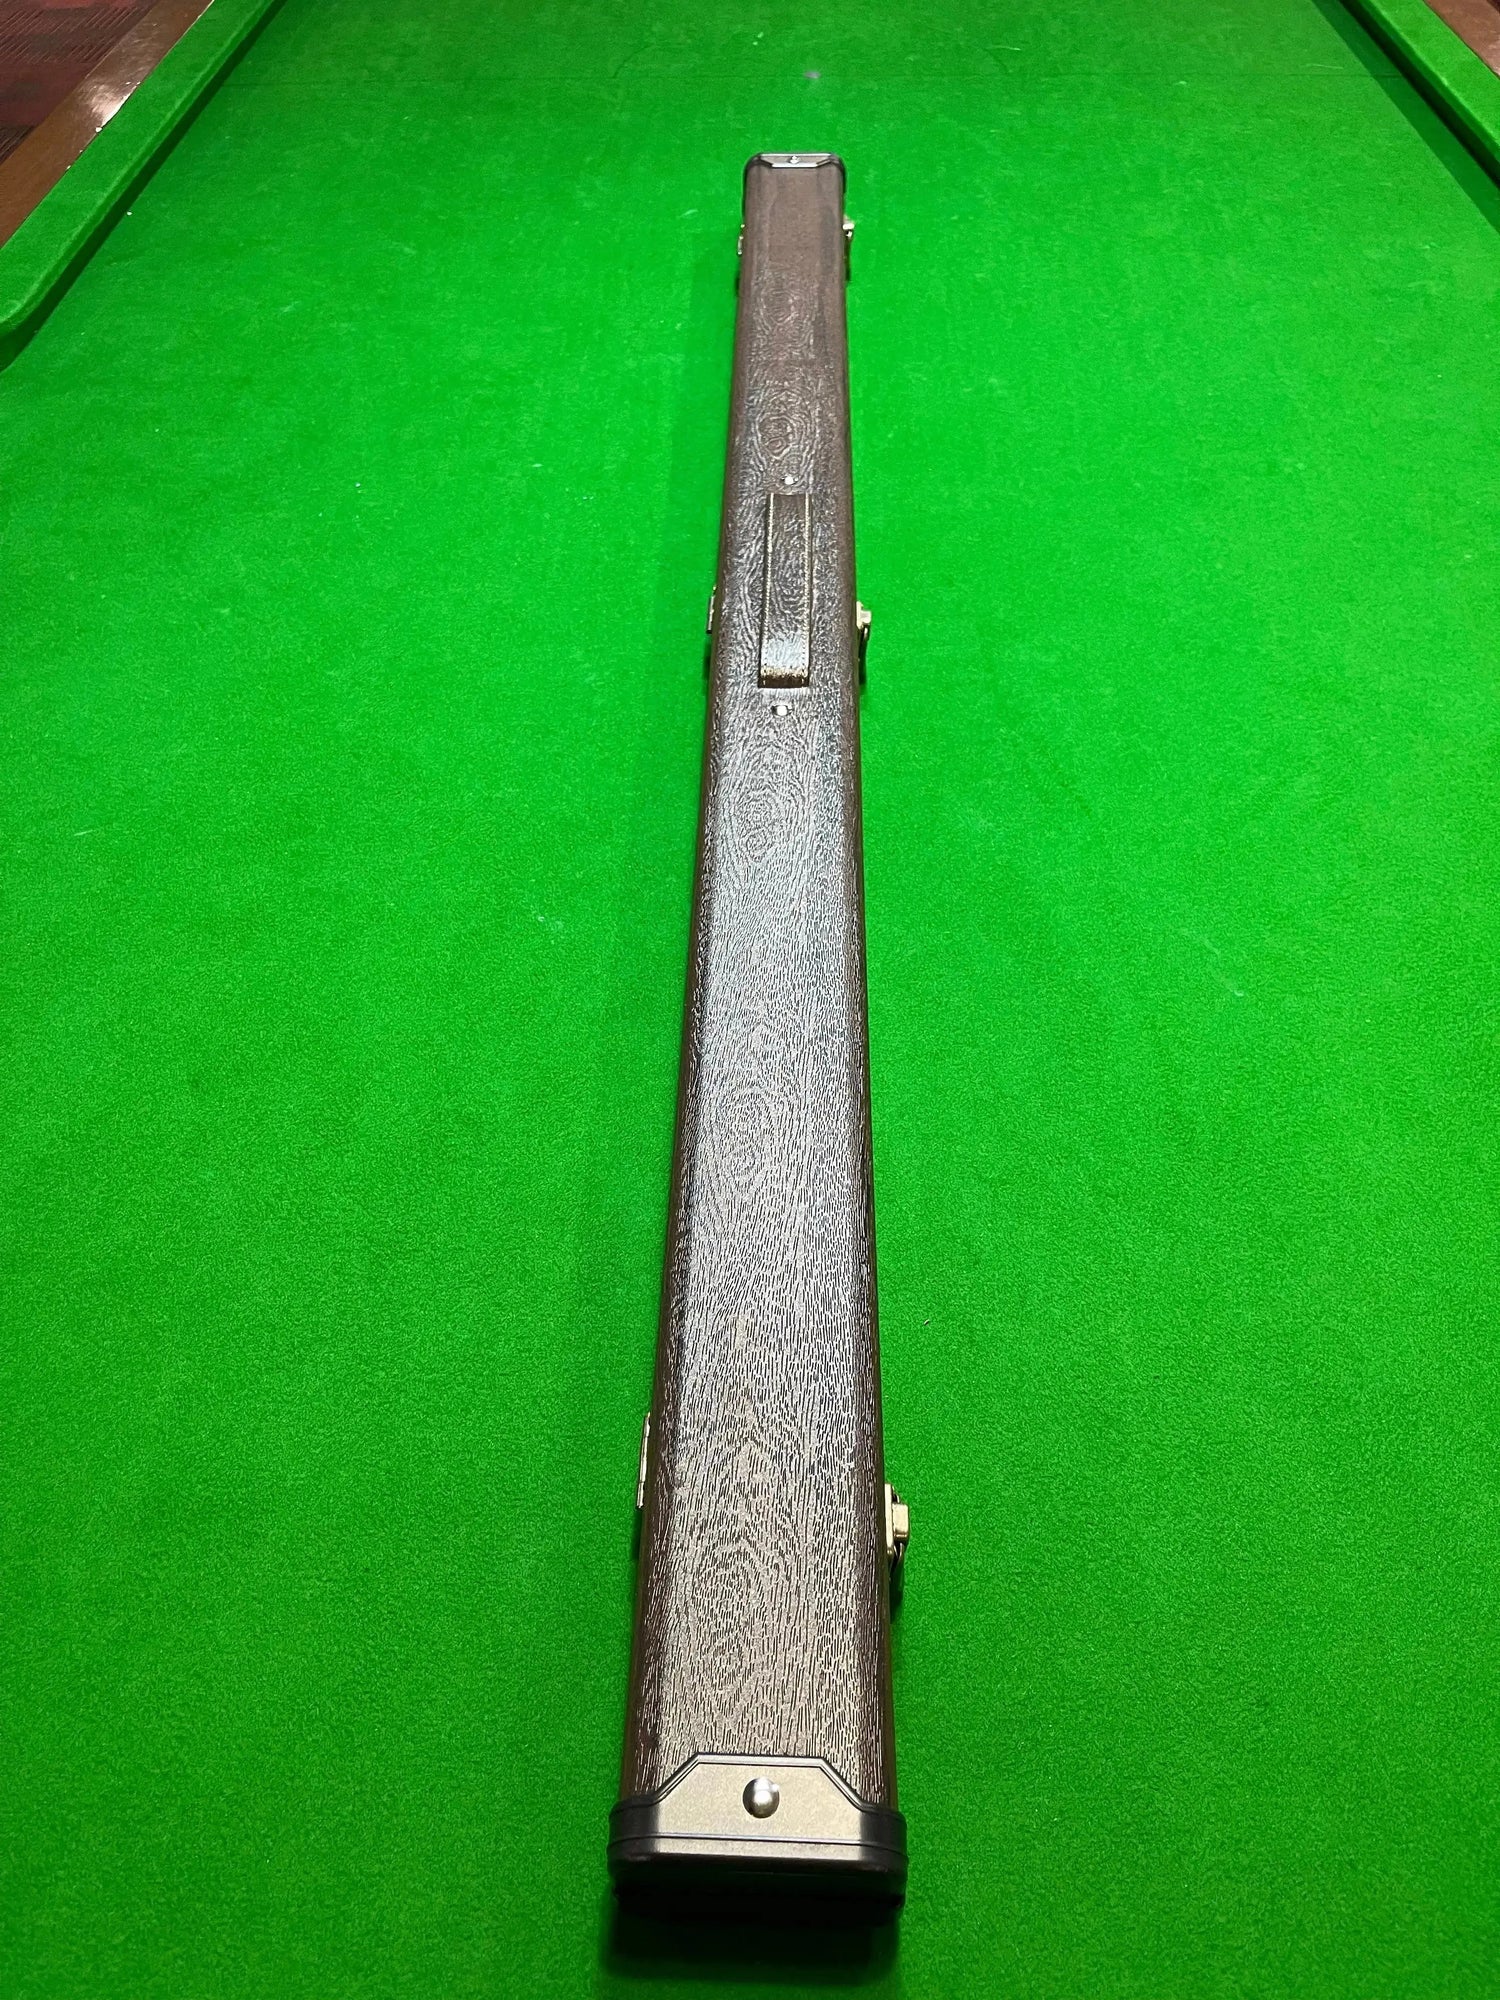 Deluxe Leather Art 3/4 Pool, Snooker, & Billiard Cue Case - Q-Masters